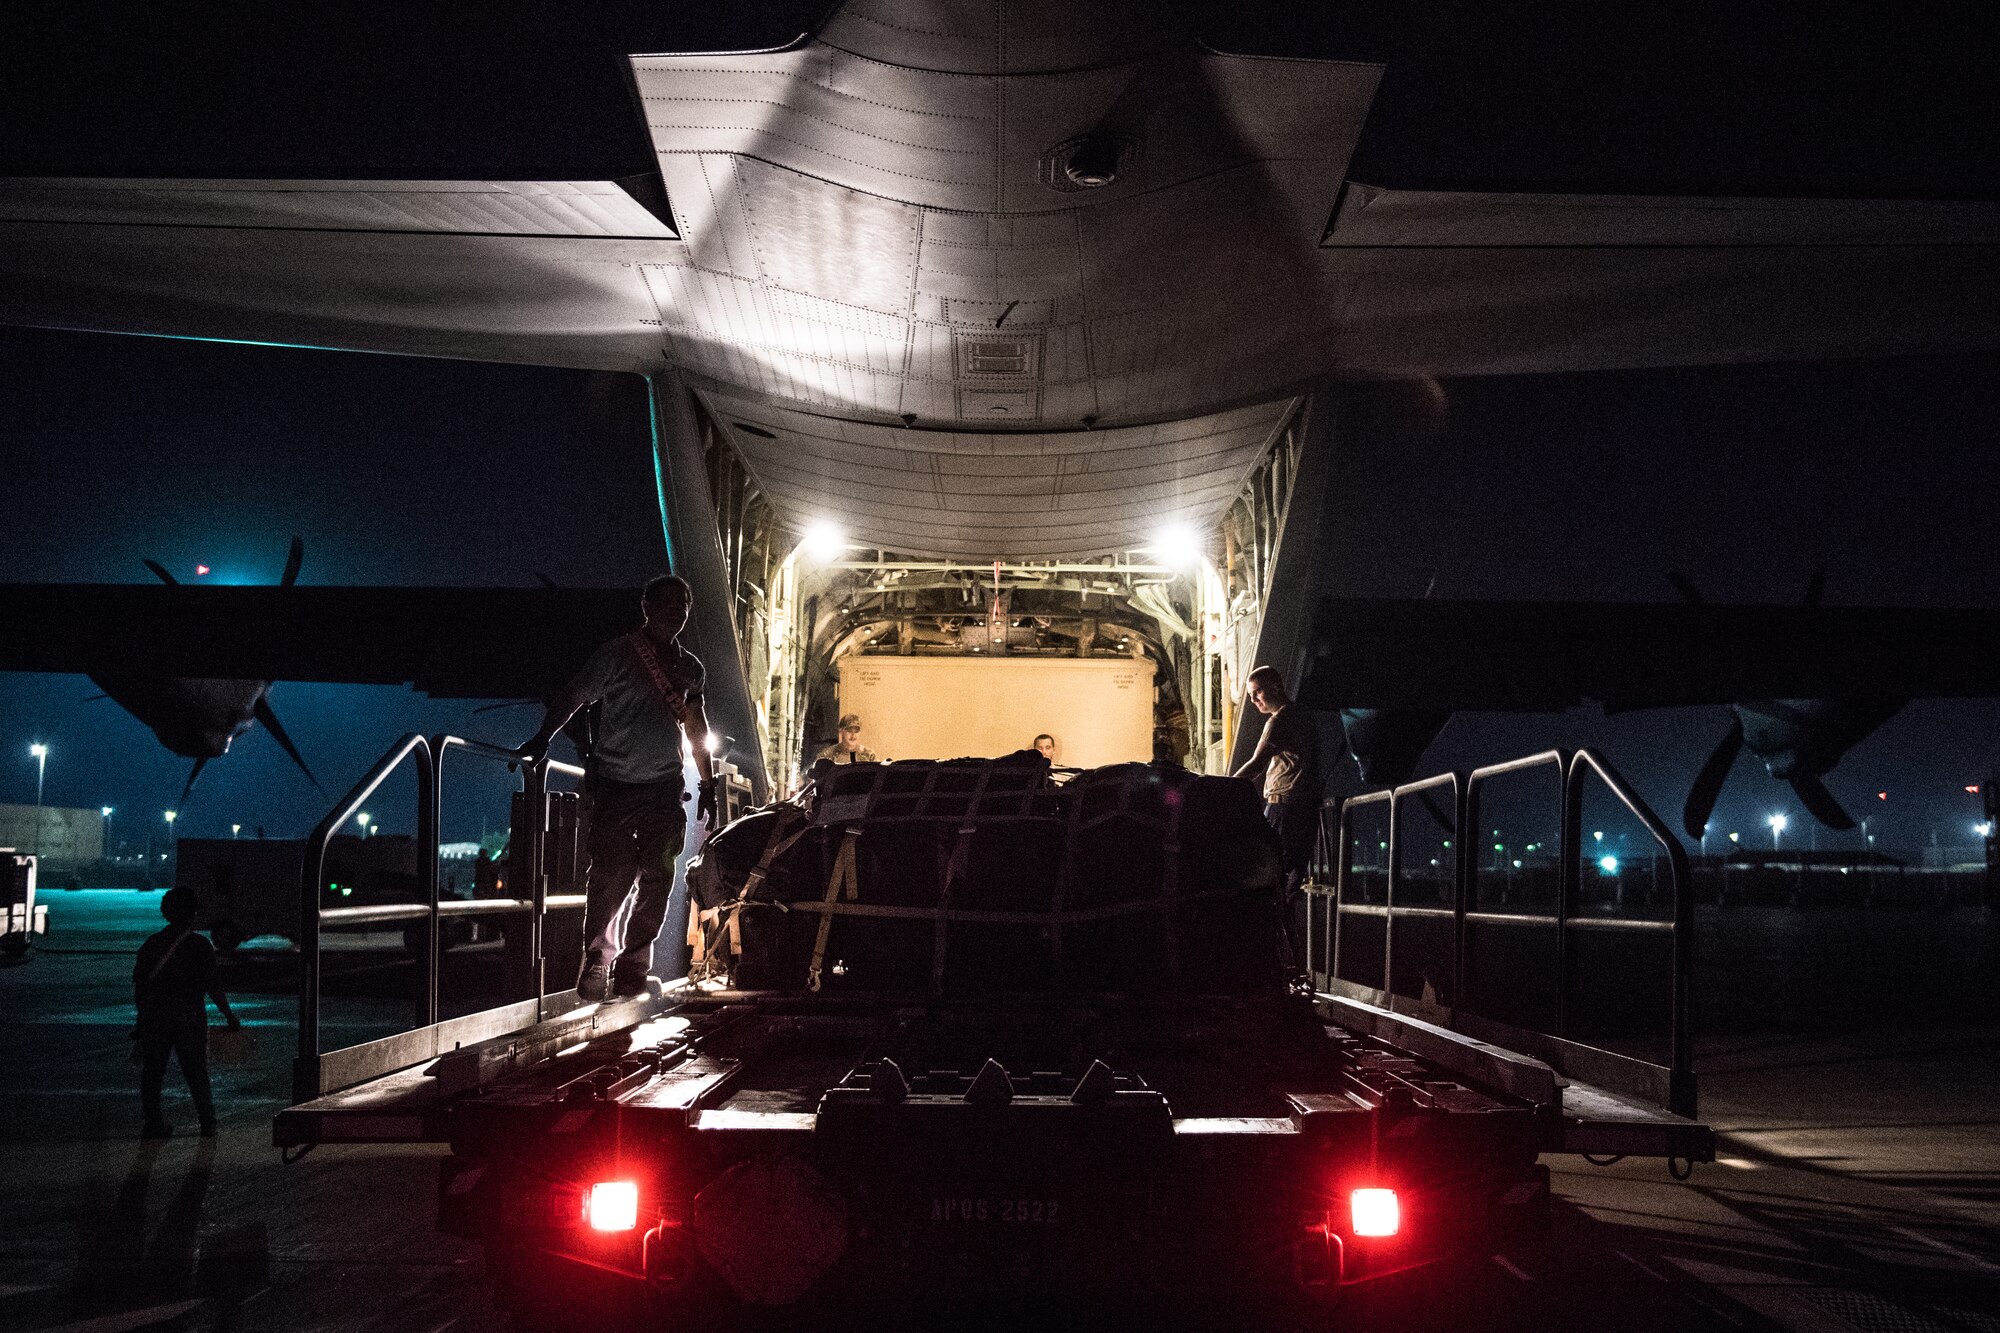 U.S. Air Force Airmen assigned to the 75th Expeditionary Airlift Squadron load luggage onto a C-130J Super Hercules at Camp Lemonnier, Djibouti, June 5, 2019. The 75th EAS provides support in medical evacuations, disaster relief, humanitarian and airdrop operations. (U.S. Air Force photo by Staff Sgt. Devin Boyer)